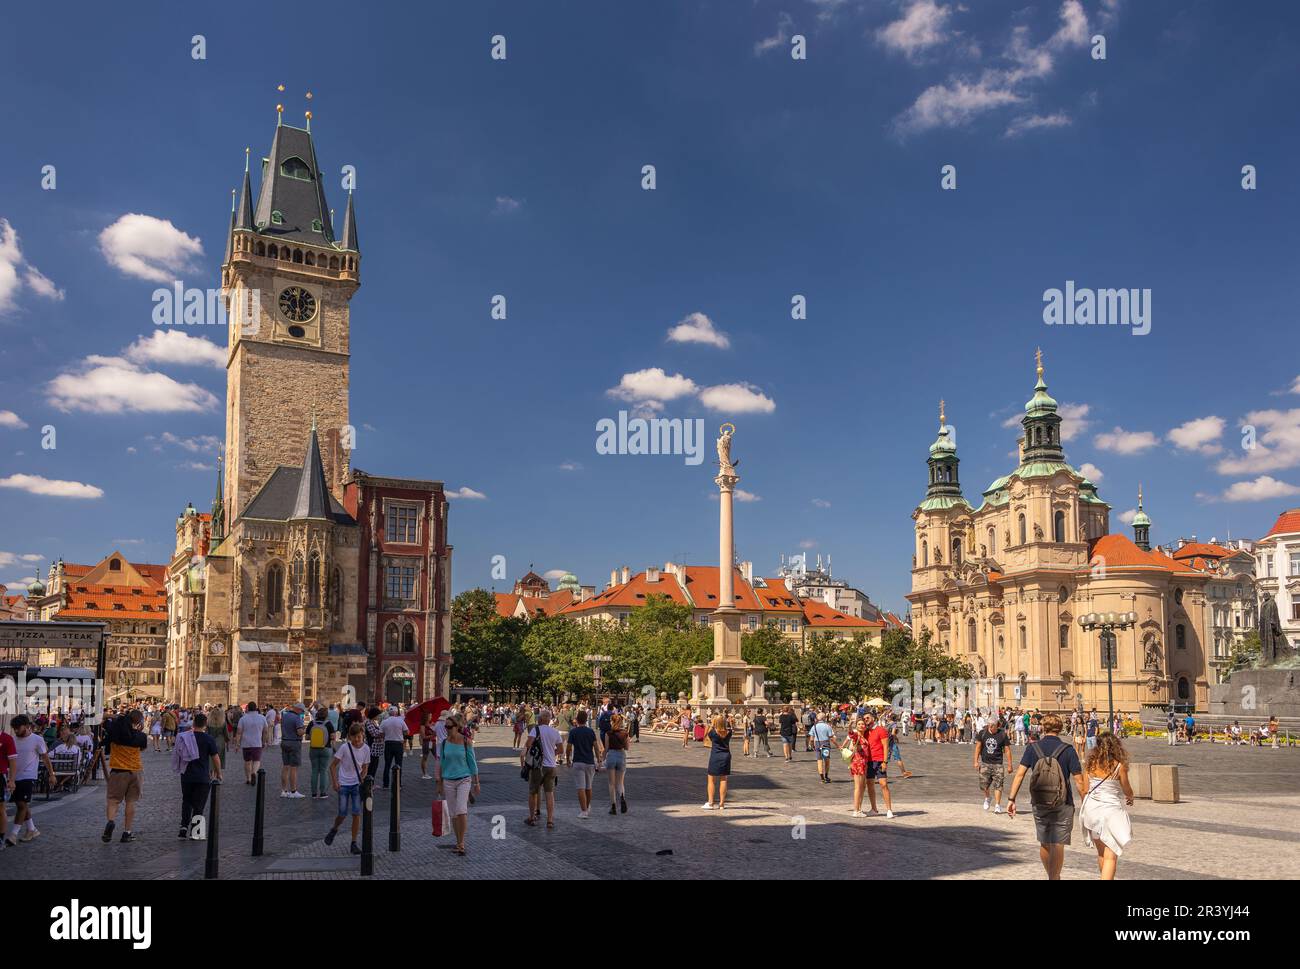 OLD TOWN SQUARE, PRAGUE, CZECH REPUBLIC - Tourists and Clock Tower, left, Matian Column, and Church of St. Nicholas at right. Stock Photo